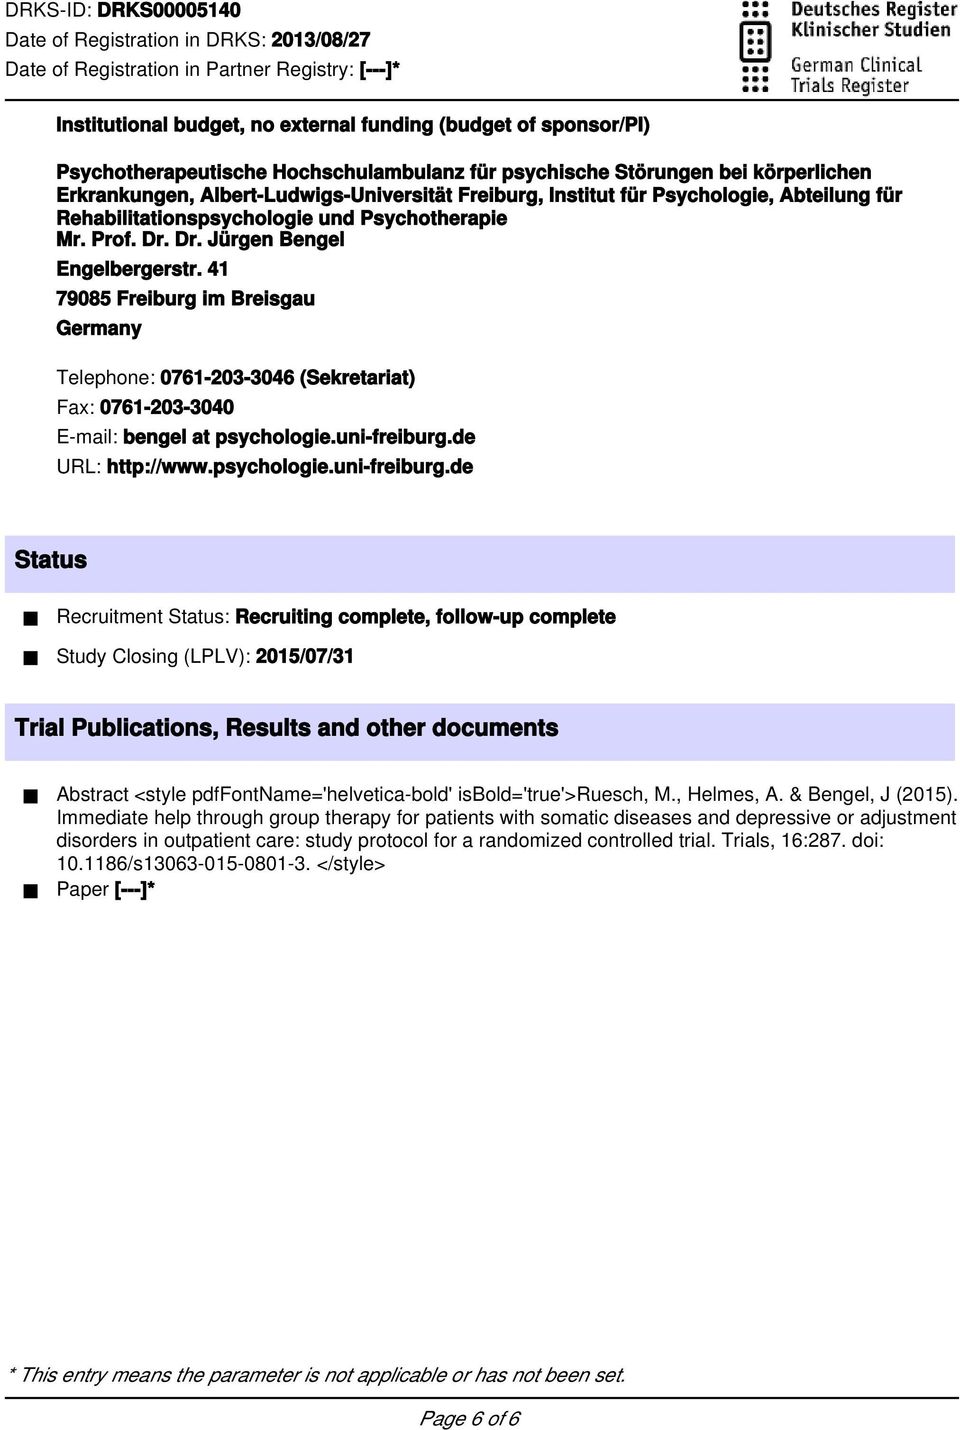 de Status Recruitment Status: Recruiting complete, follow-up complete Study Closing (LPLV): 2015/07/31 Trial Publications, Results and other documents Abstract <style pdffontname='helvetica-bold'